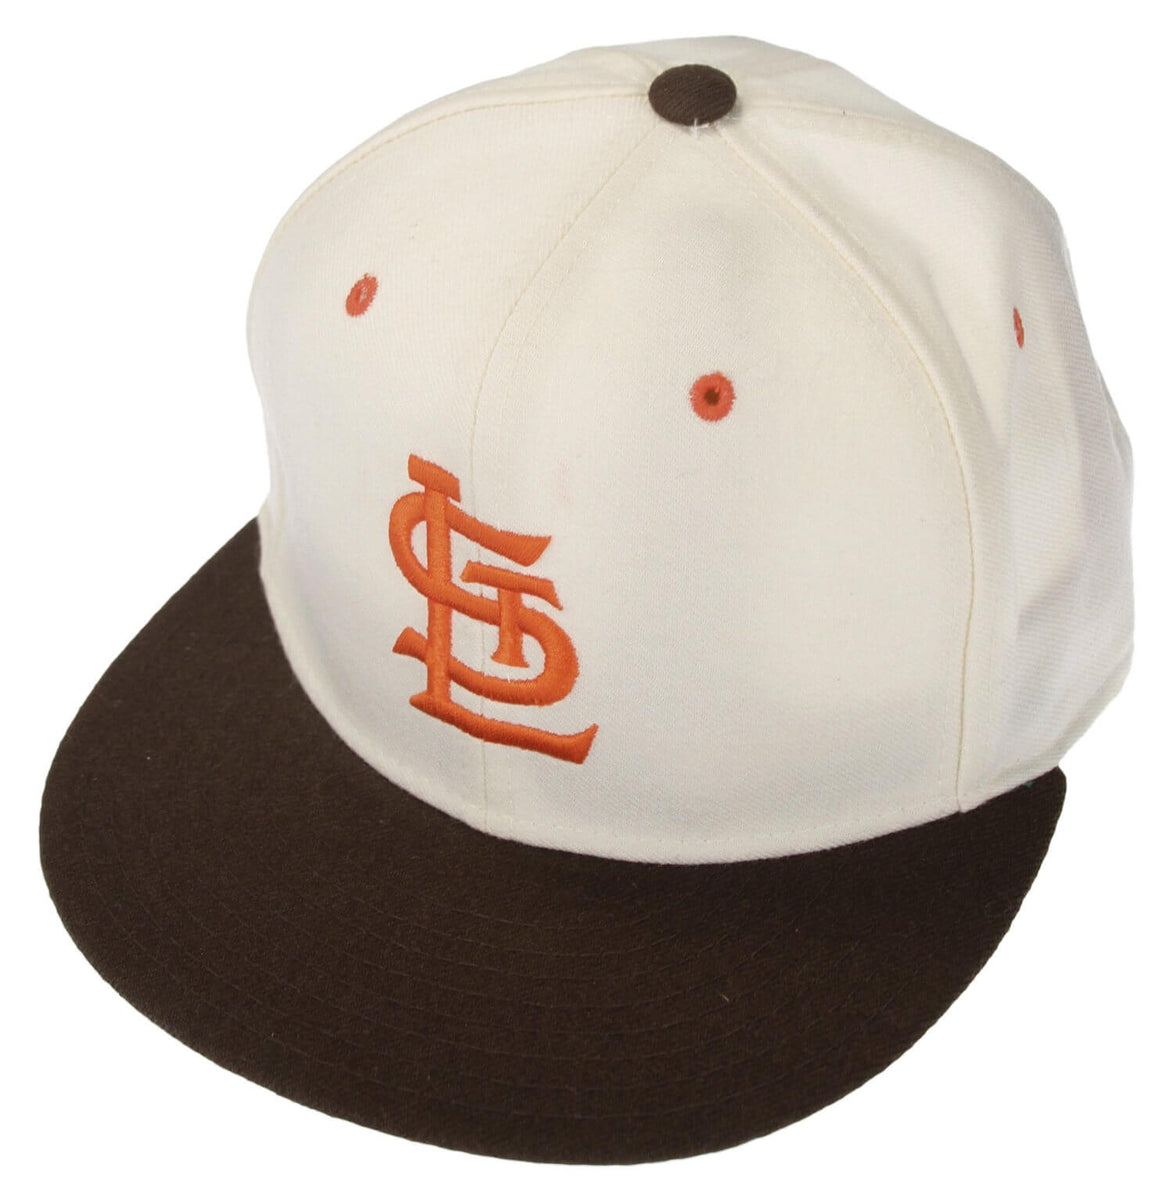 Accessories, St Louis Browns Hat Baseball Cap Fitted Roman Leather Vintage